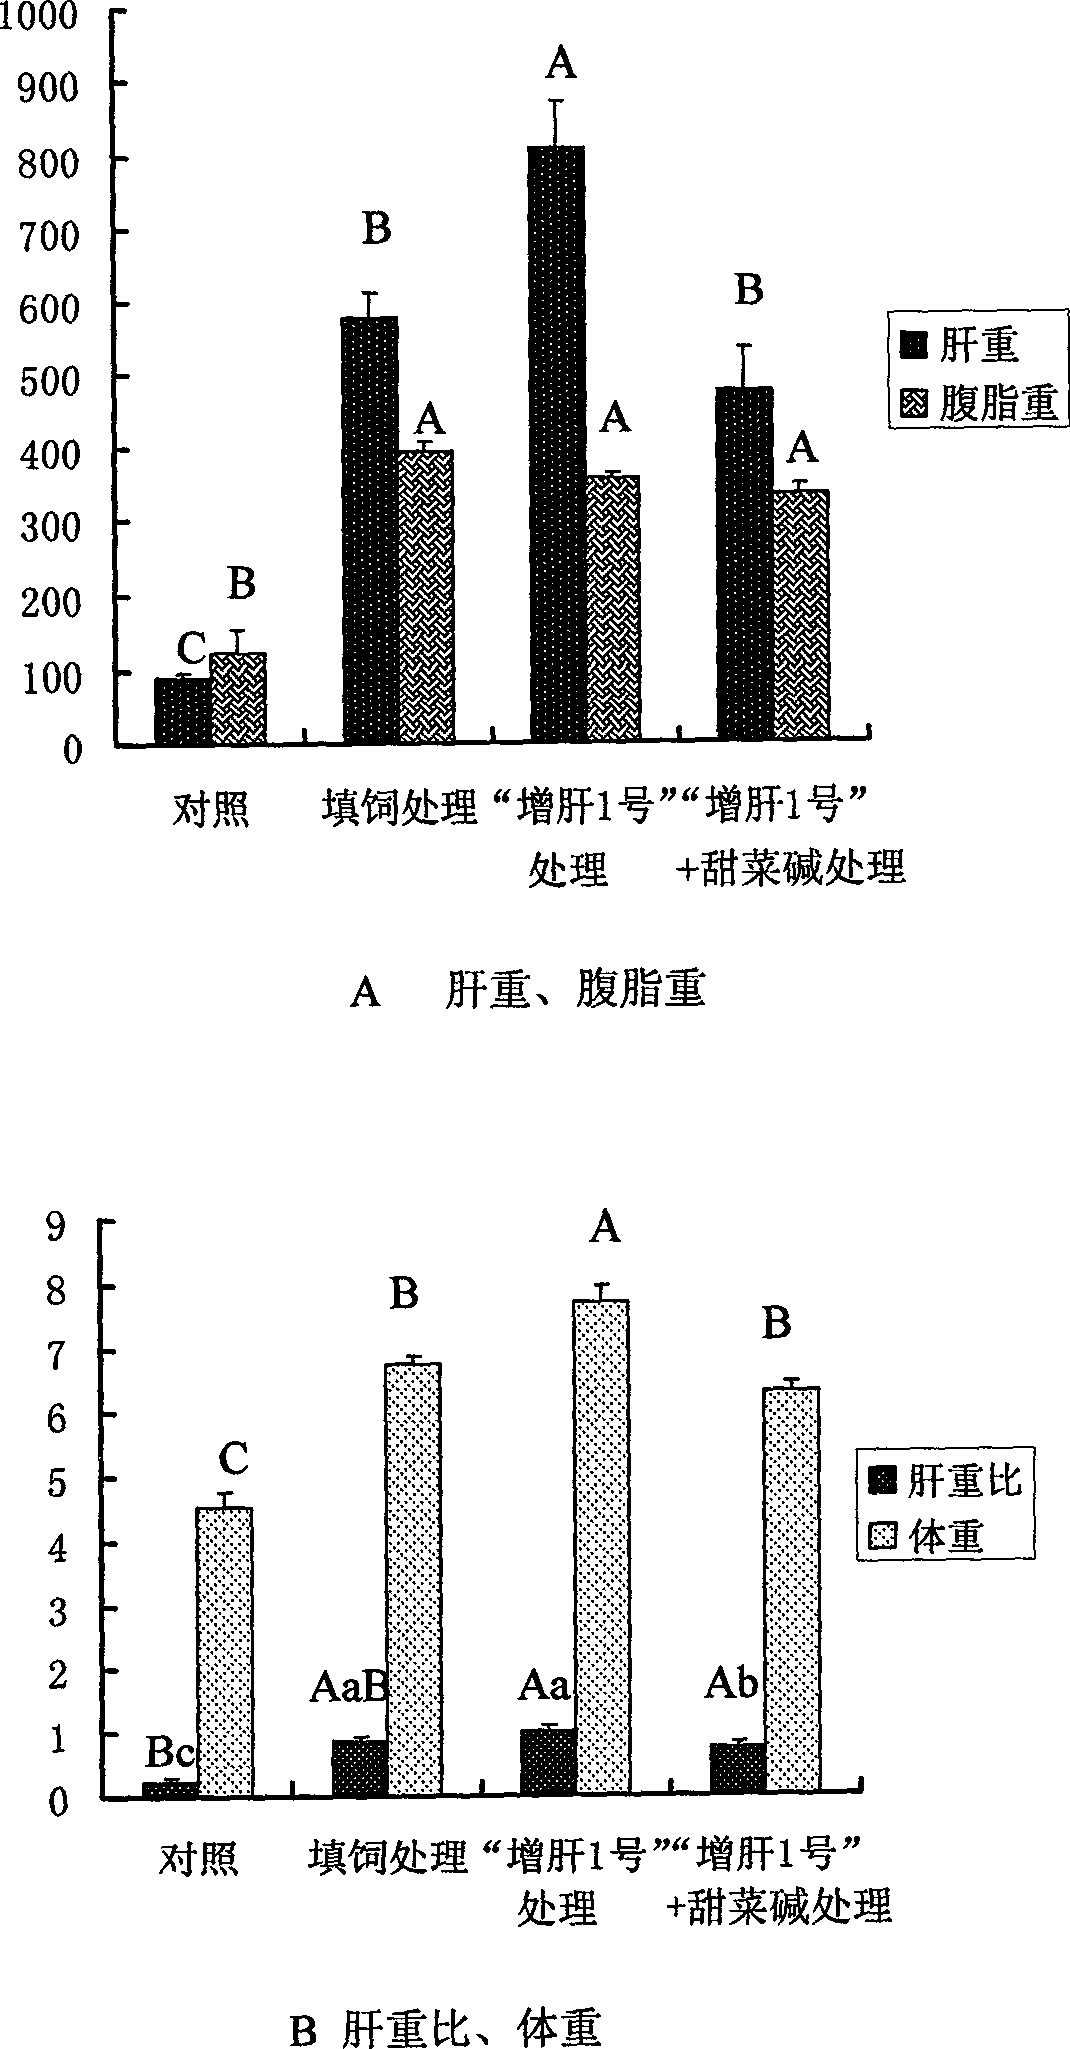 Feedstuff additive for increasing liver and increasing unsaturated fatty acid content